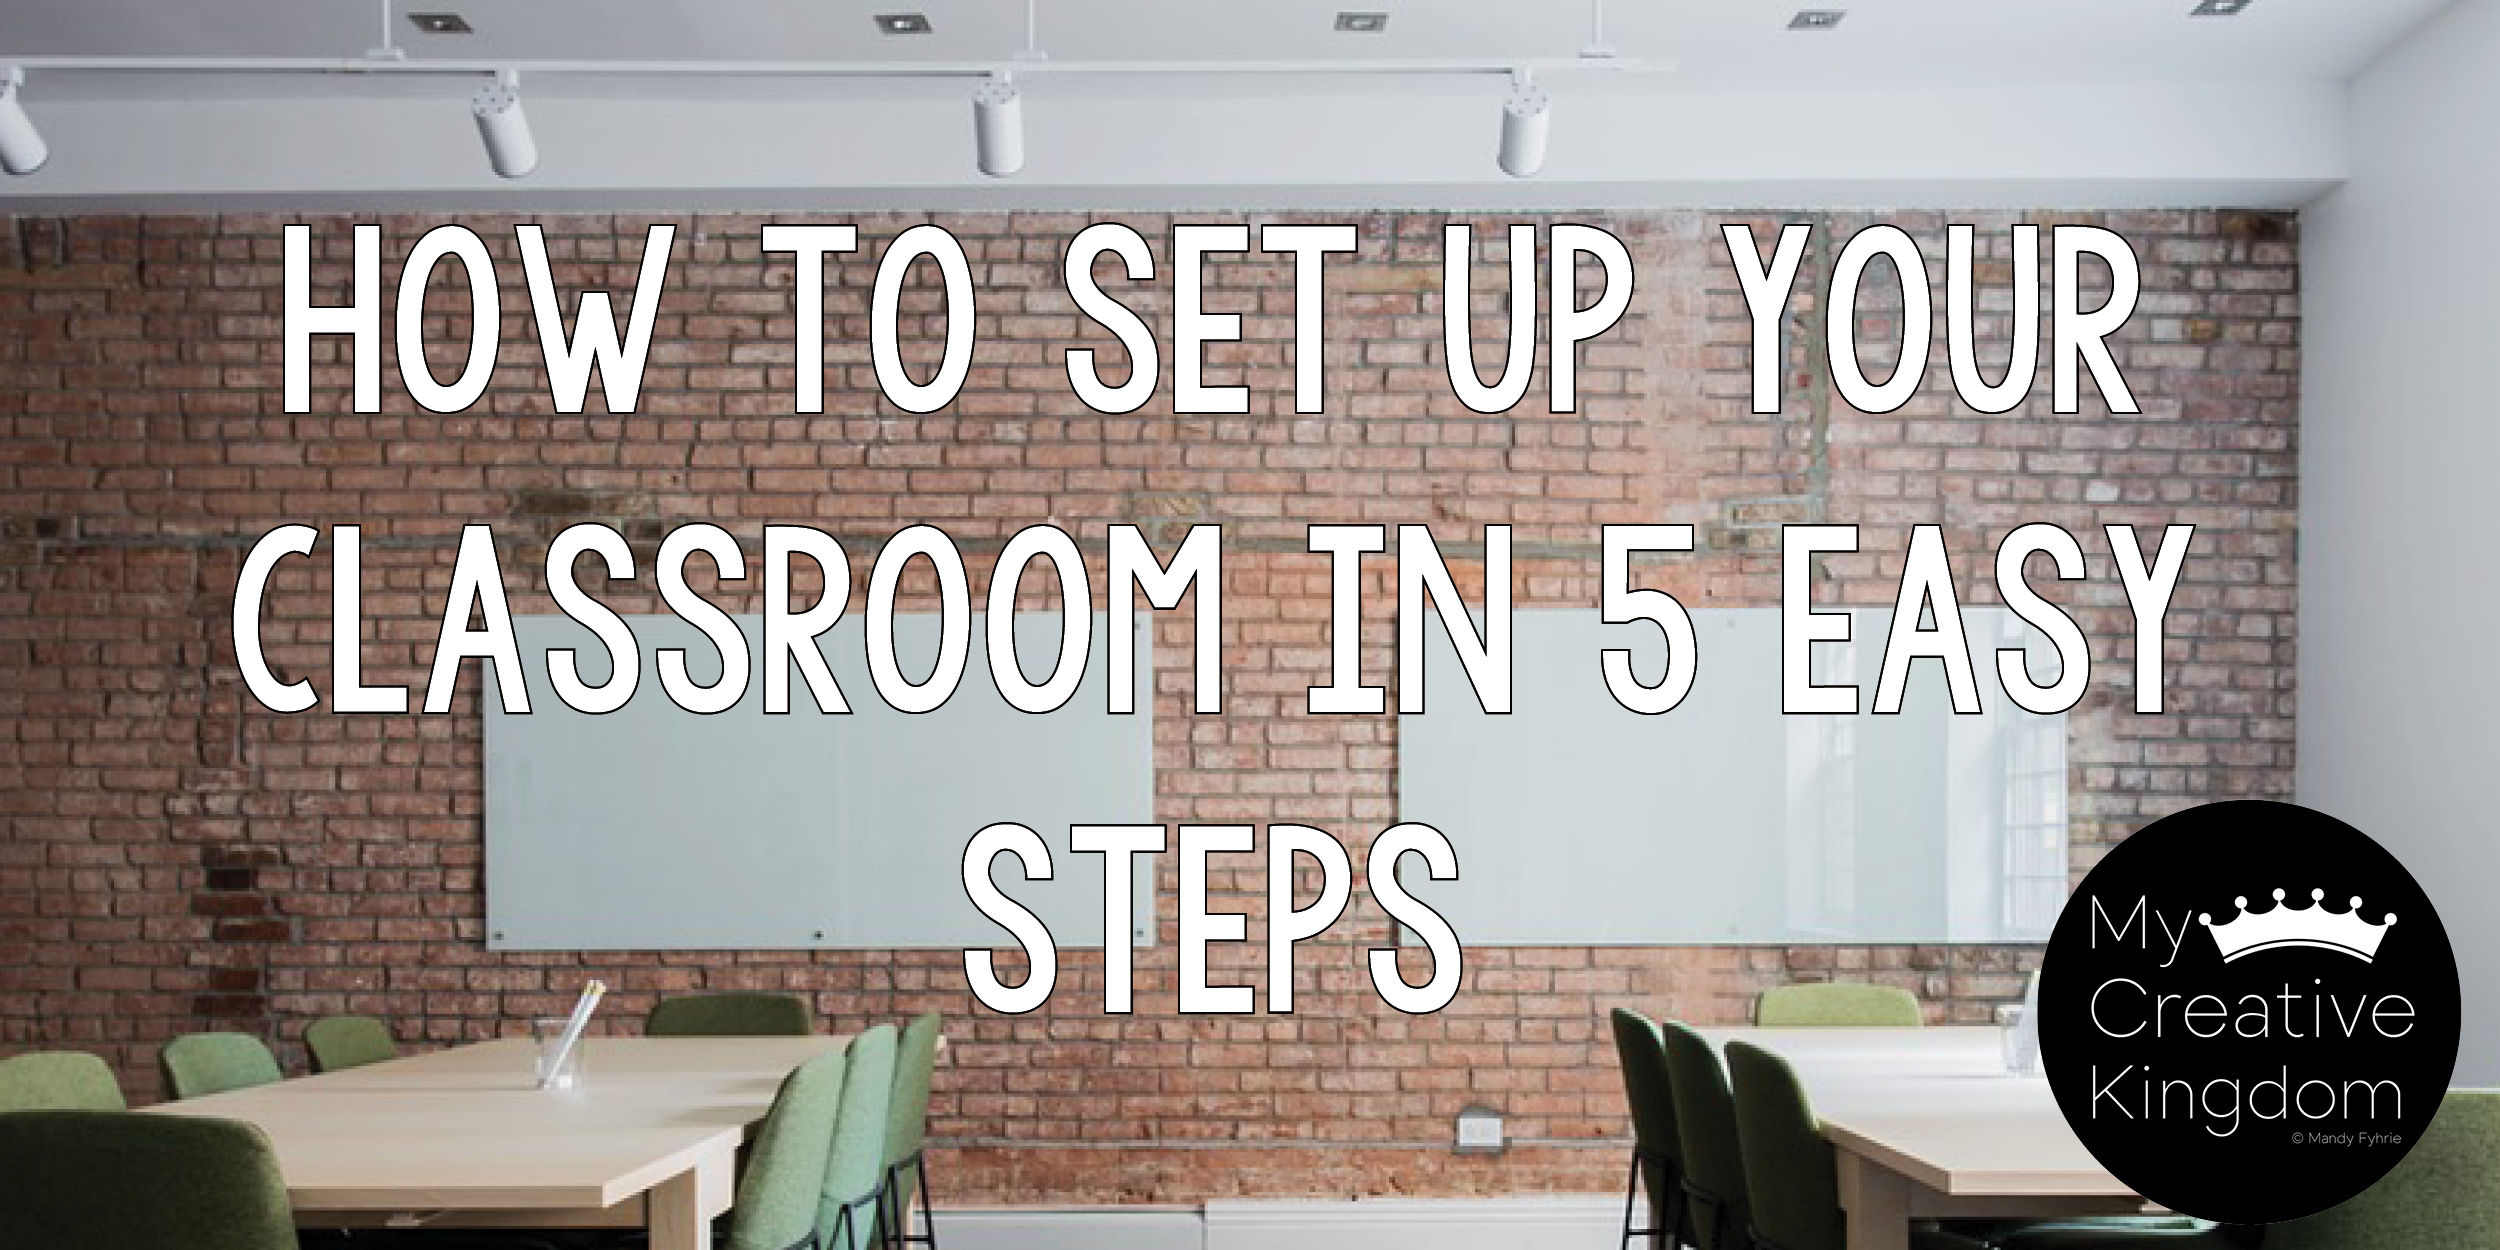 How to Set up Your Classroom in 5 Easy Steps